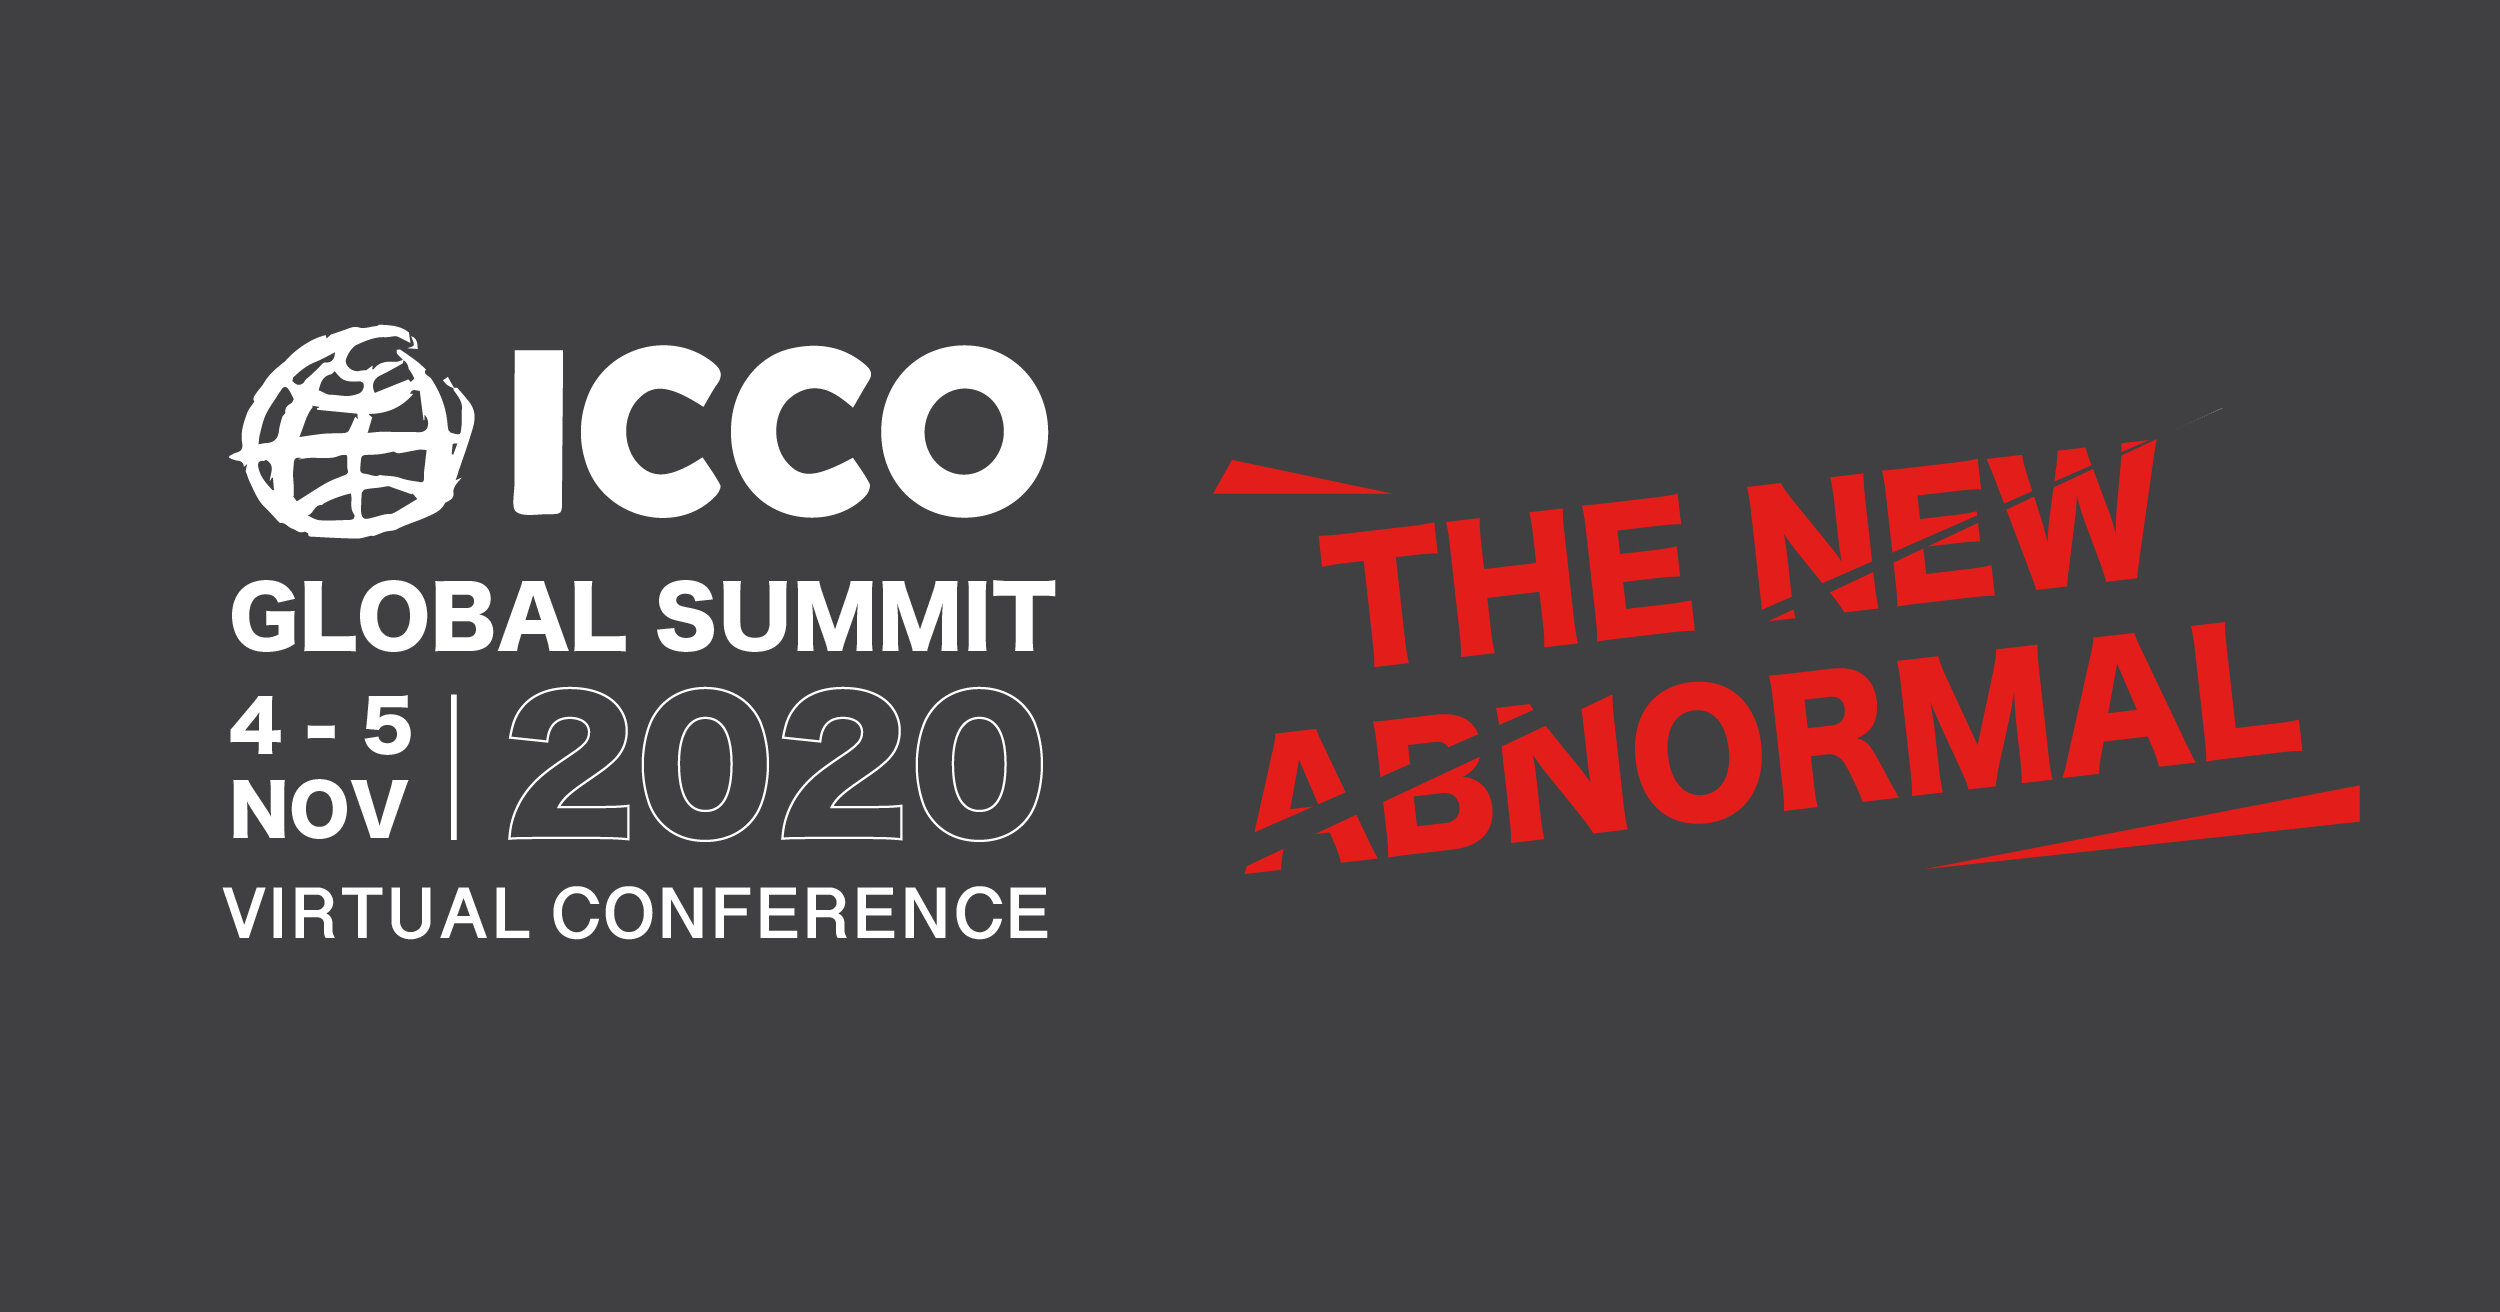 Comms8 is glad to announce that our Managing Director Carol Chan is invited to speak at ICCO Global Summit 2020 - ‘THE NEW ABNORMAL’ (Copy)